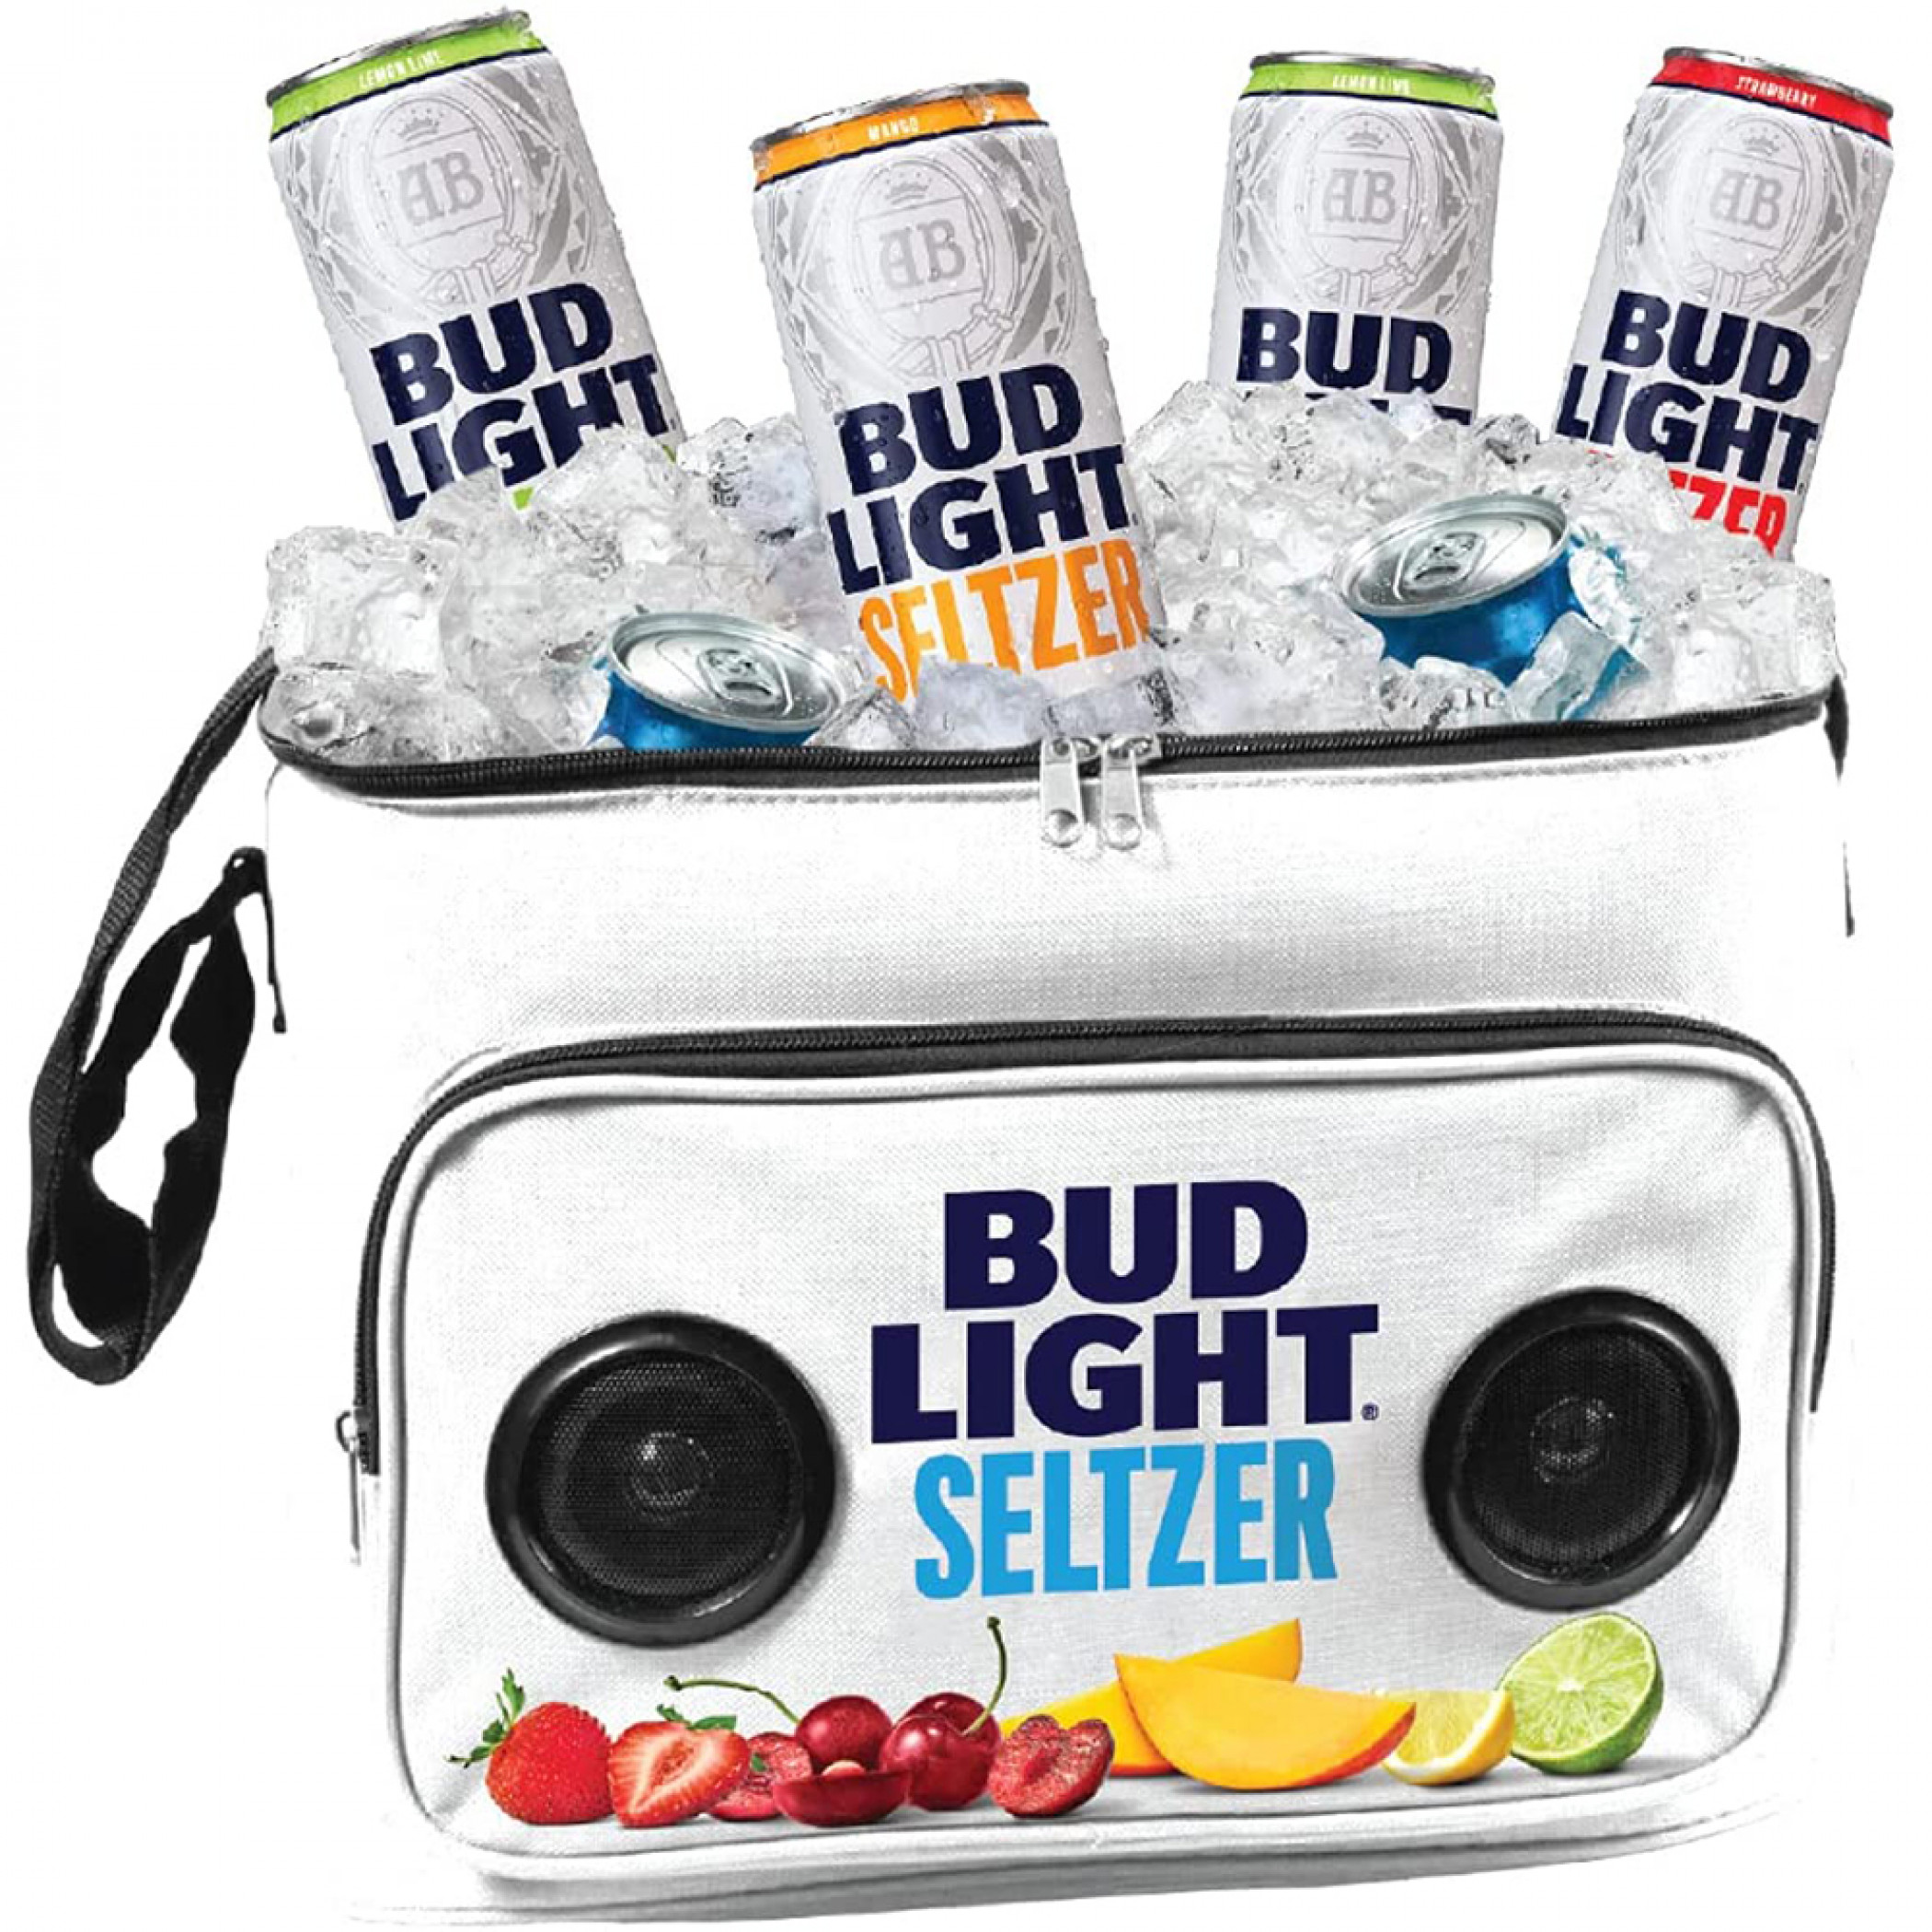 https://mmv2api.s3.us-east-2.amazonaws.com/products/images/Bud%20Light%20Seltzer%20Soft%20Cooler%20Bag%20with%20Built-in%20Rechargeable%20Wireless%20Bluetooth%20Speakers%20Foldable%20and%20Portable%20Durable%20and%20Material%20Compatible%20for%20Smartphones,%20Tablets%20&%20MP3%20Players-1.jpg